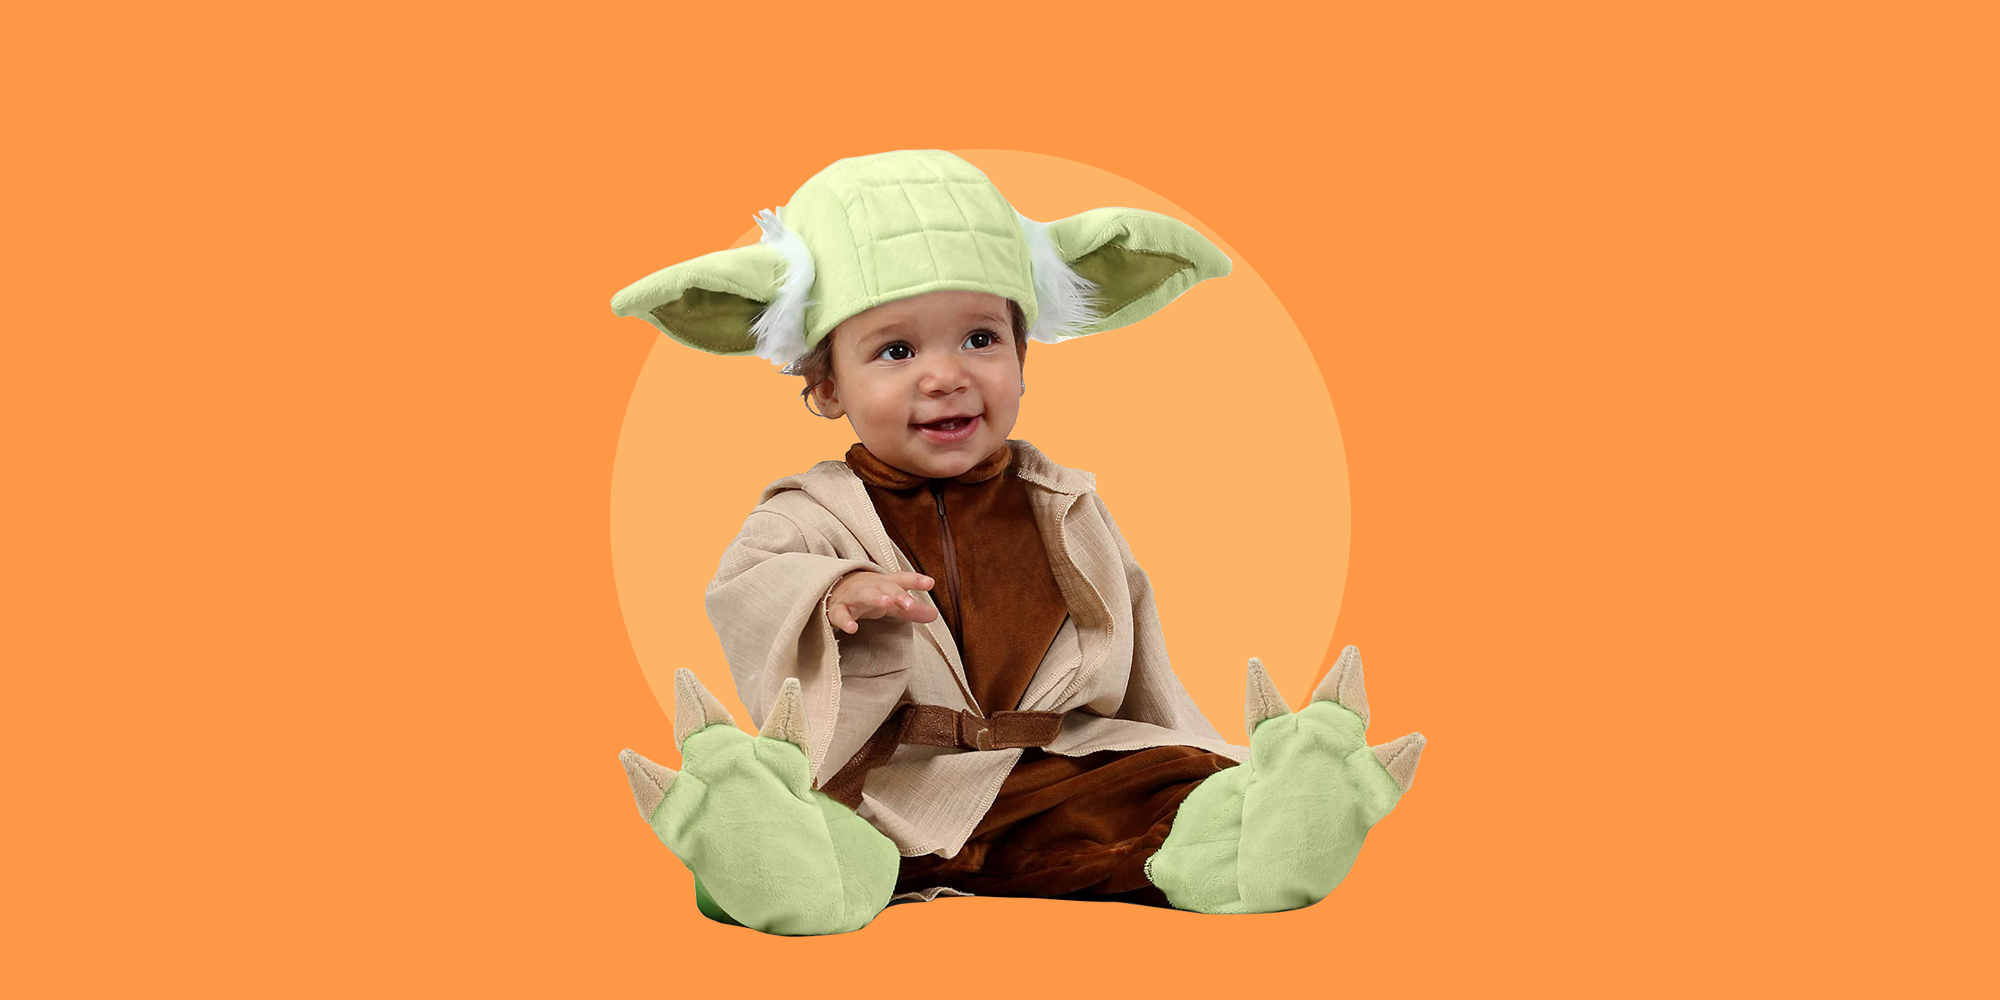 food costumes for babies